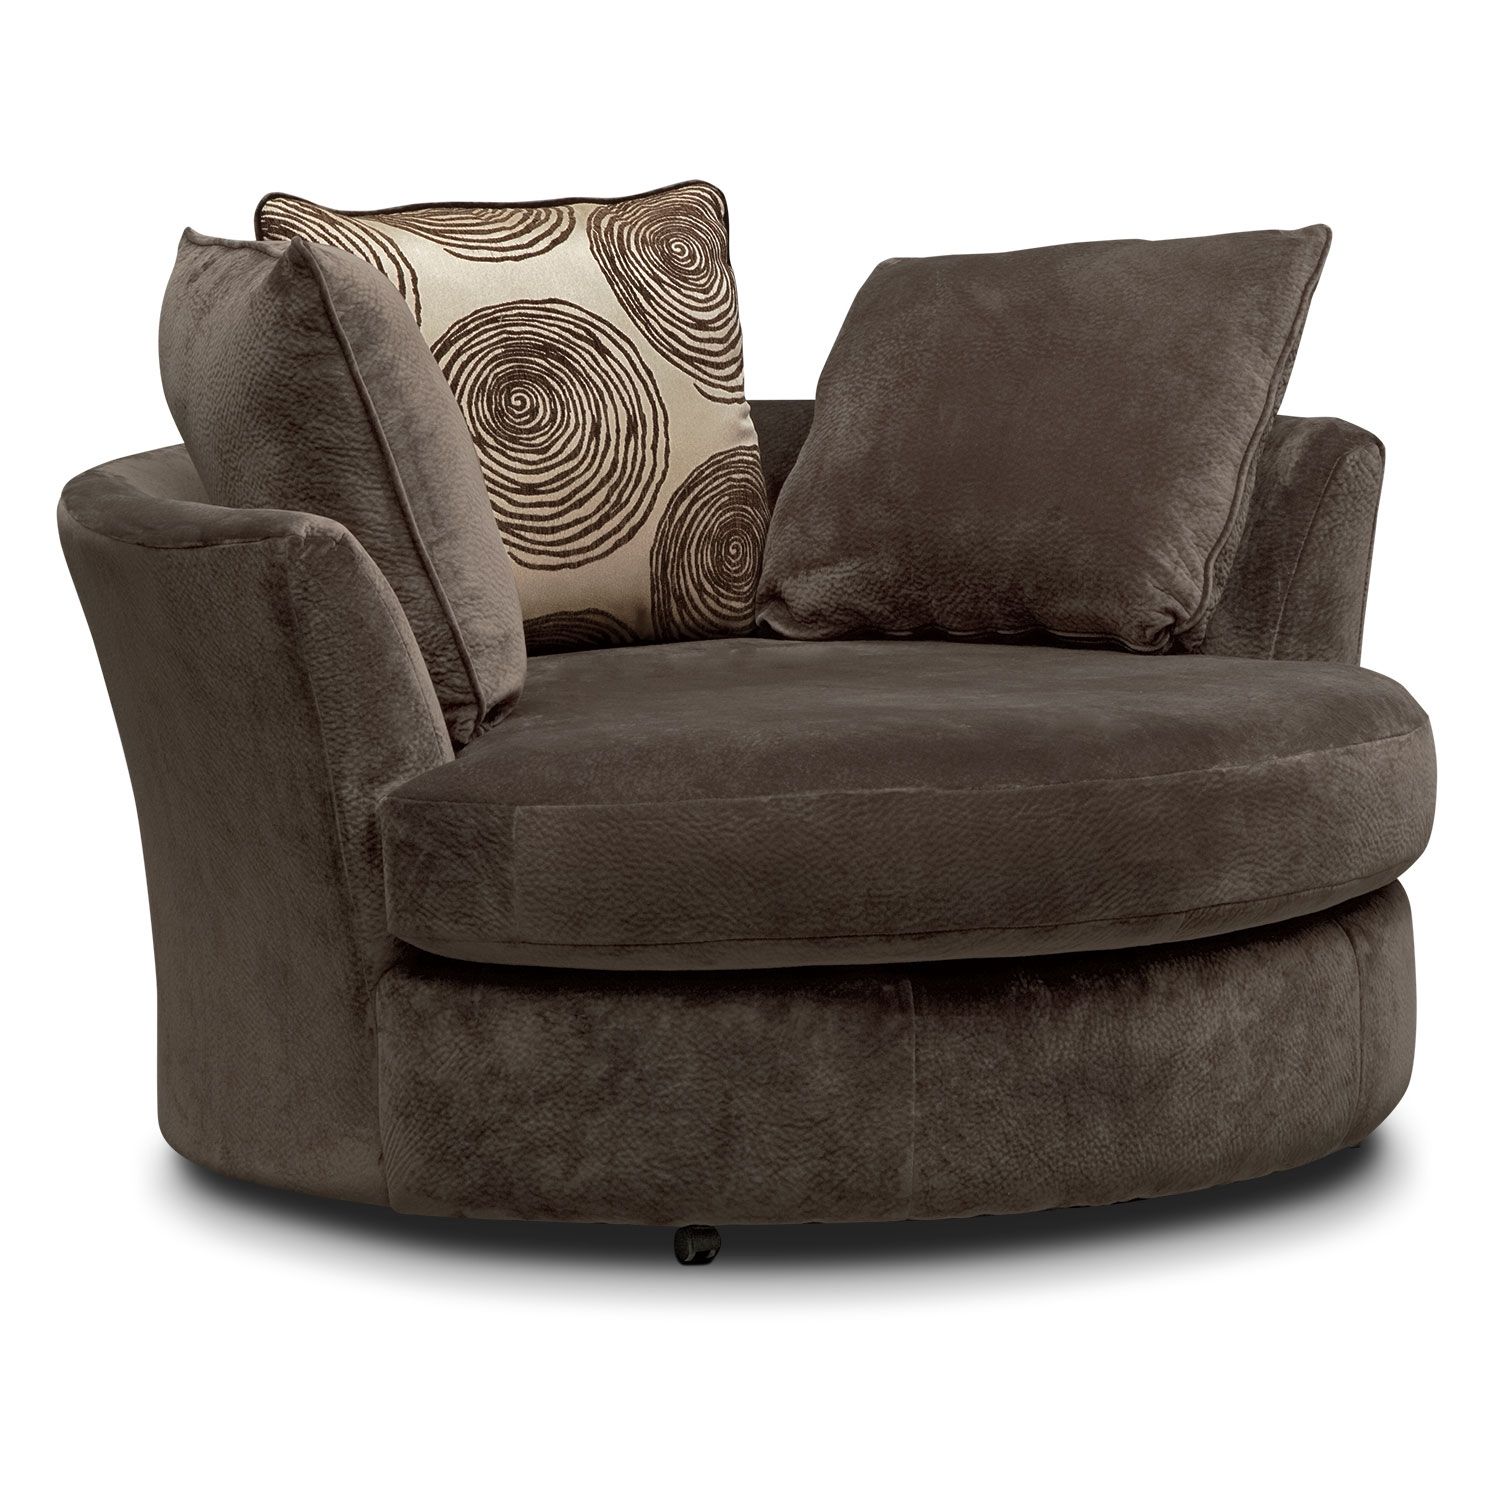 Cordelle Swivel Chair Chocolate Value City Furniture In Spinning Sofa Chairs (View 6 of 15)